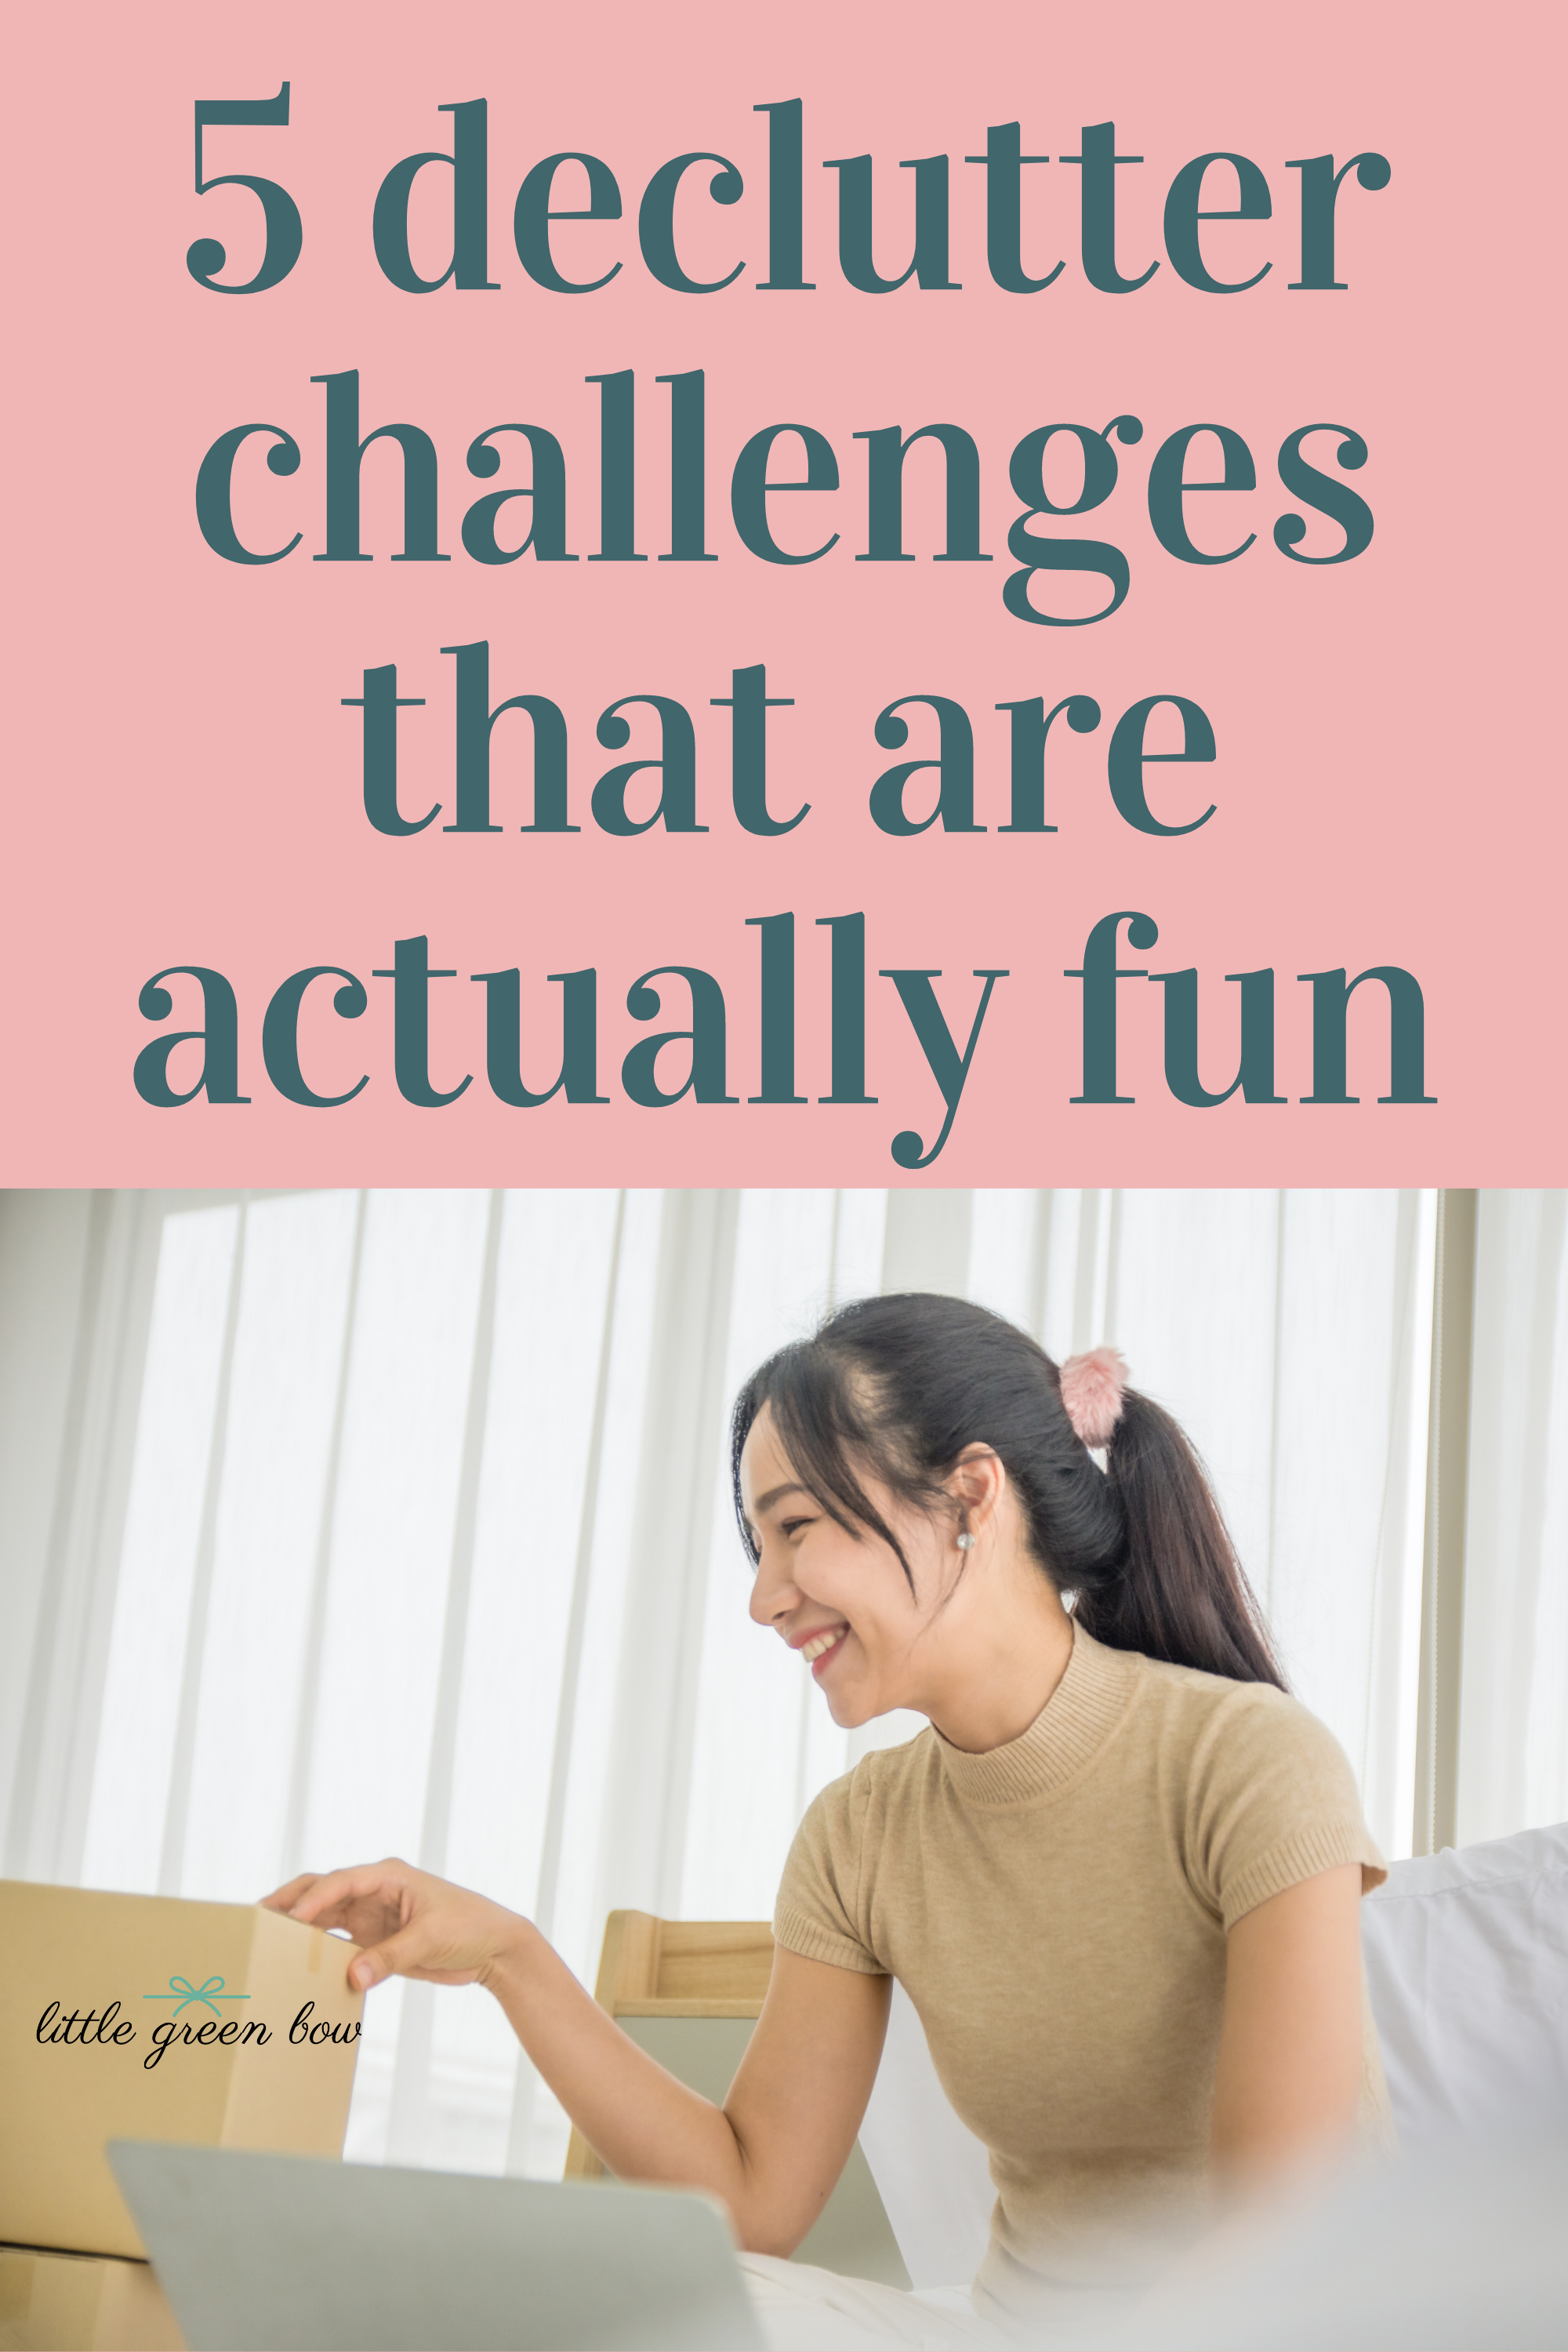 5 Decluttering Challenges that are Actually Fun